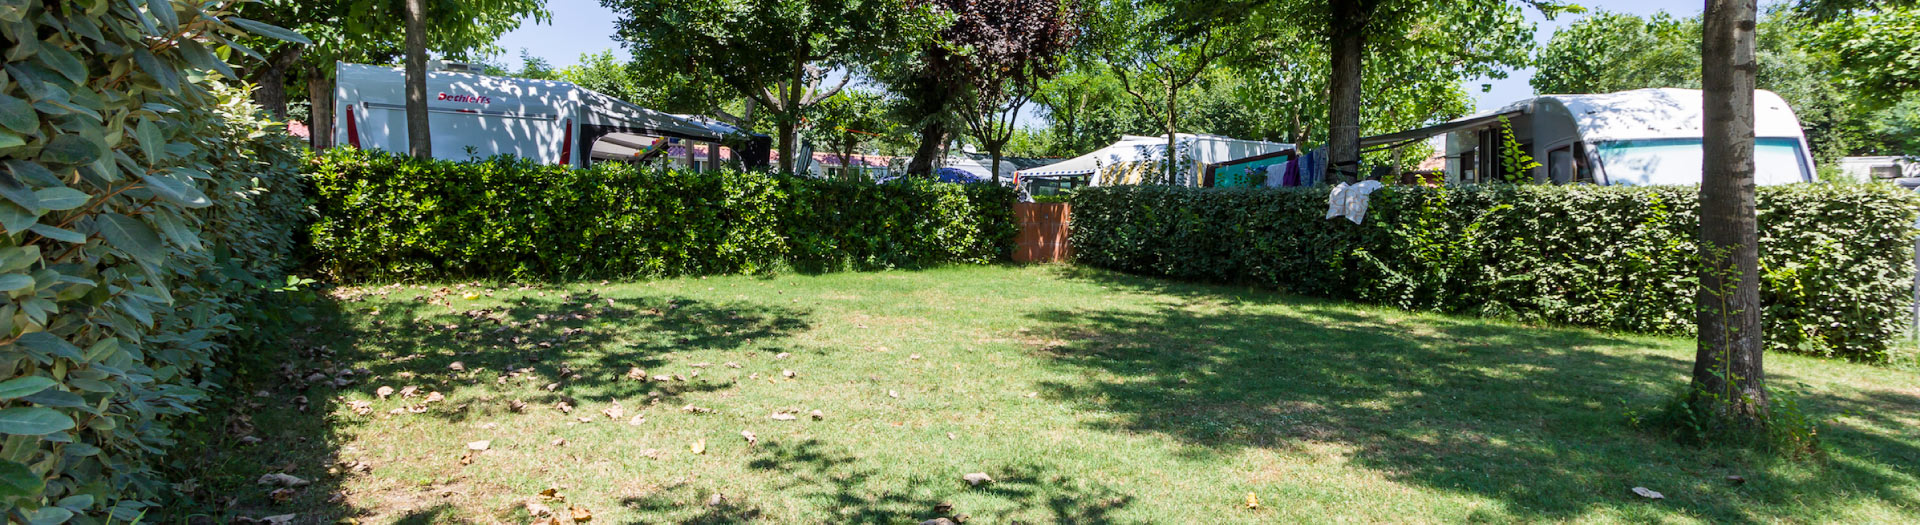 Camping Rubicone Piazzola Verde